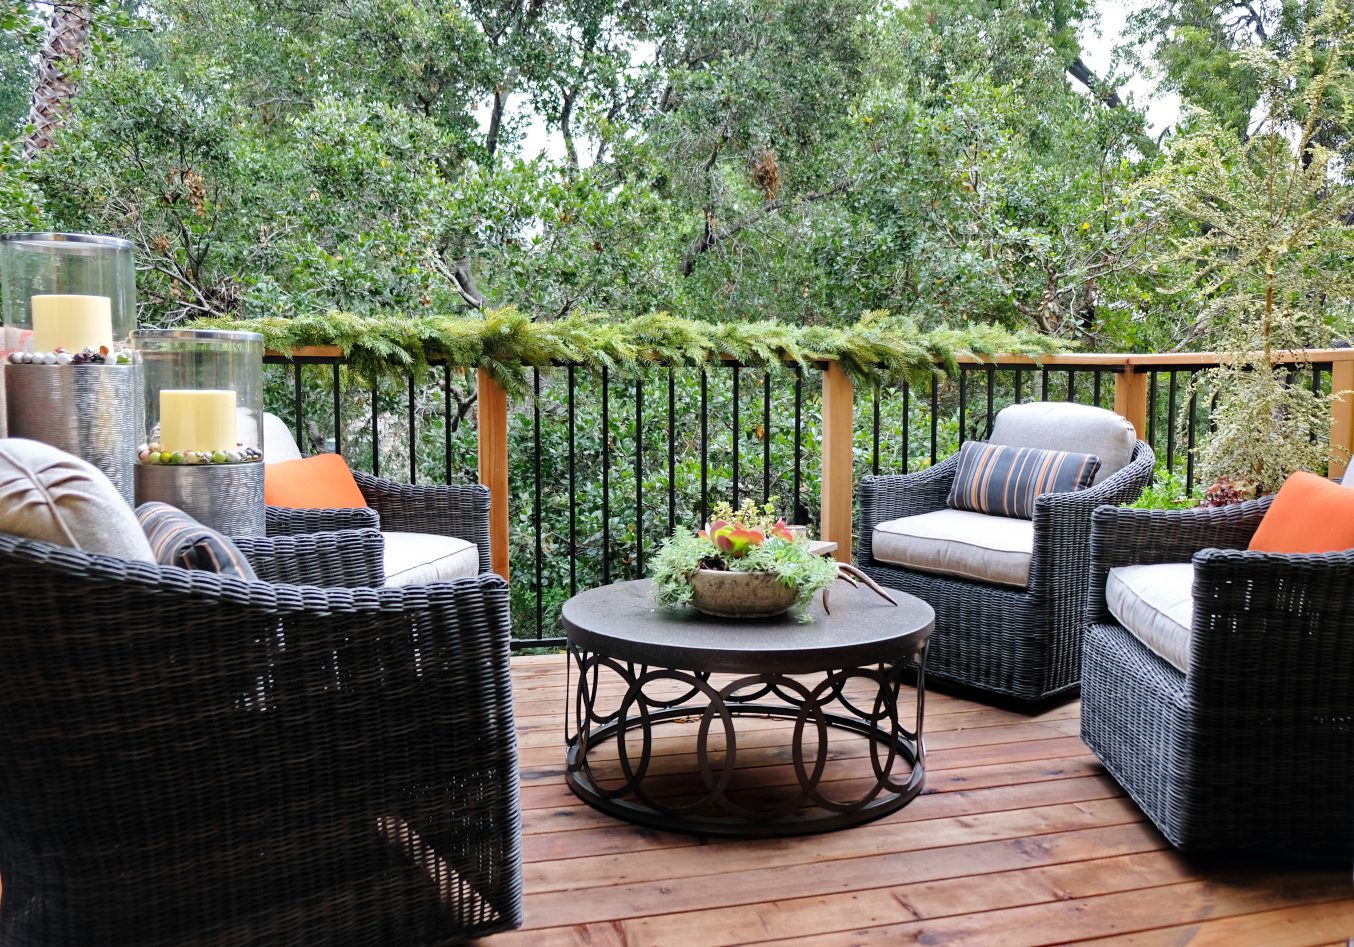 6 Tips to Make Your Backyard Feel Like A Private Getaway – Without Leaving Your Home